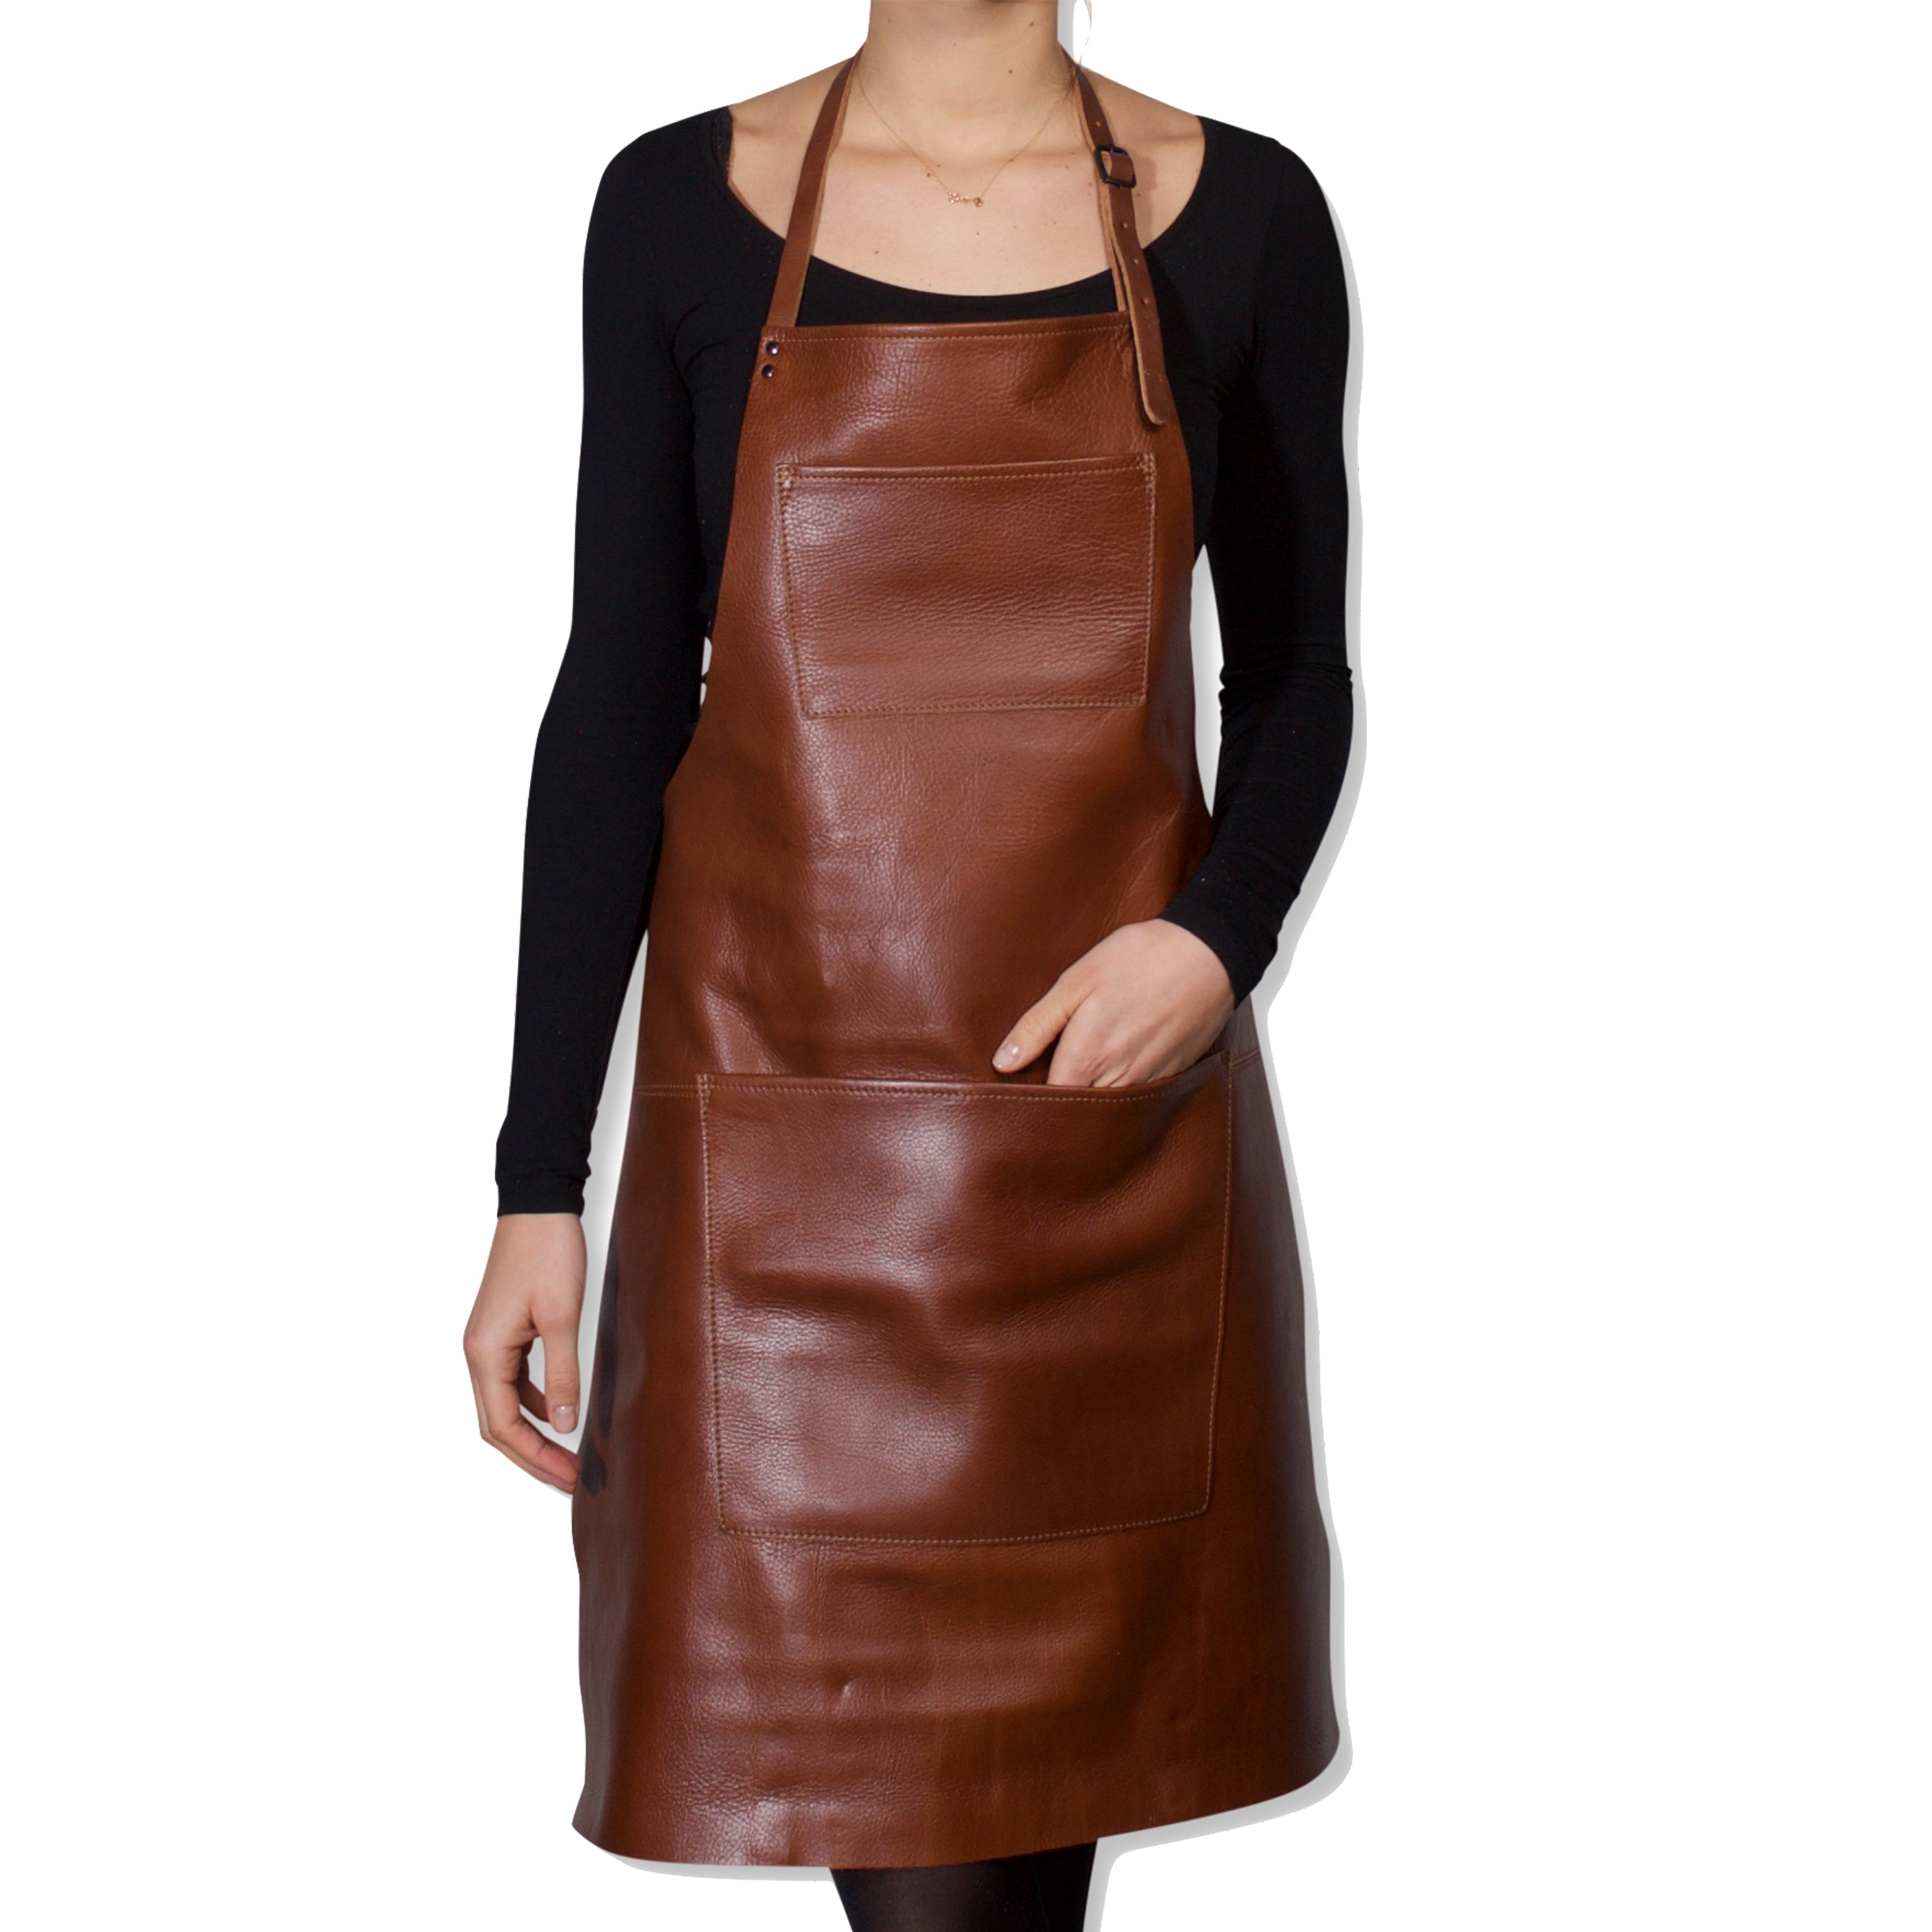 Dutchdeluxes Full Length Coated Classic Brown Leather "Professional Apron" - apron - Dutchdeluxes - Aprons - Brand_Dutchdeluxes - Dutchdeluxes - Fathers Day - KTFWHS - Textiles_Aprons - DDLP-A-CB-Belt-buckle-apron1